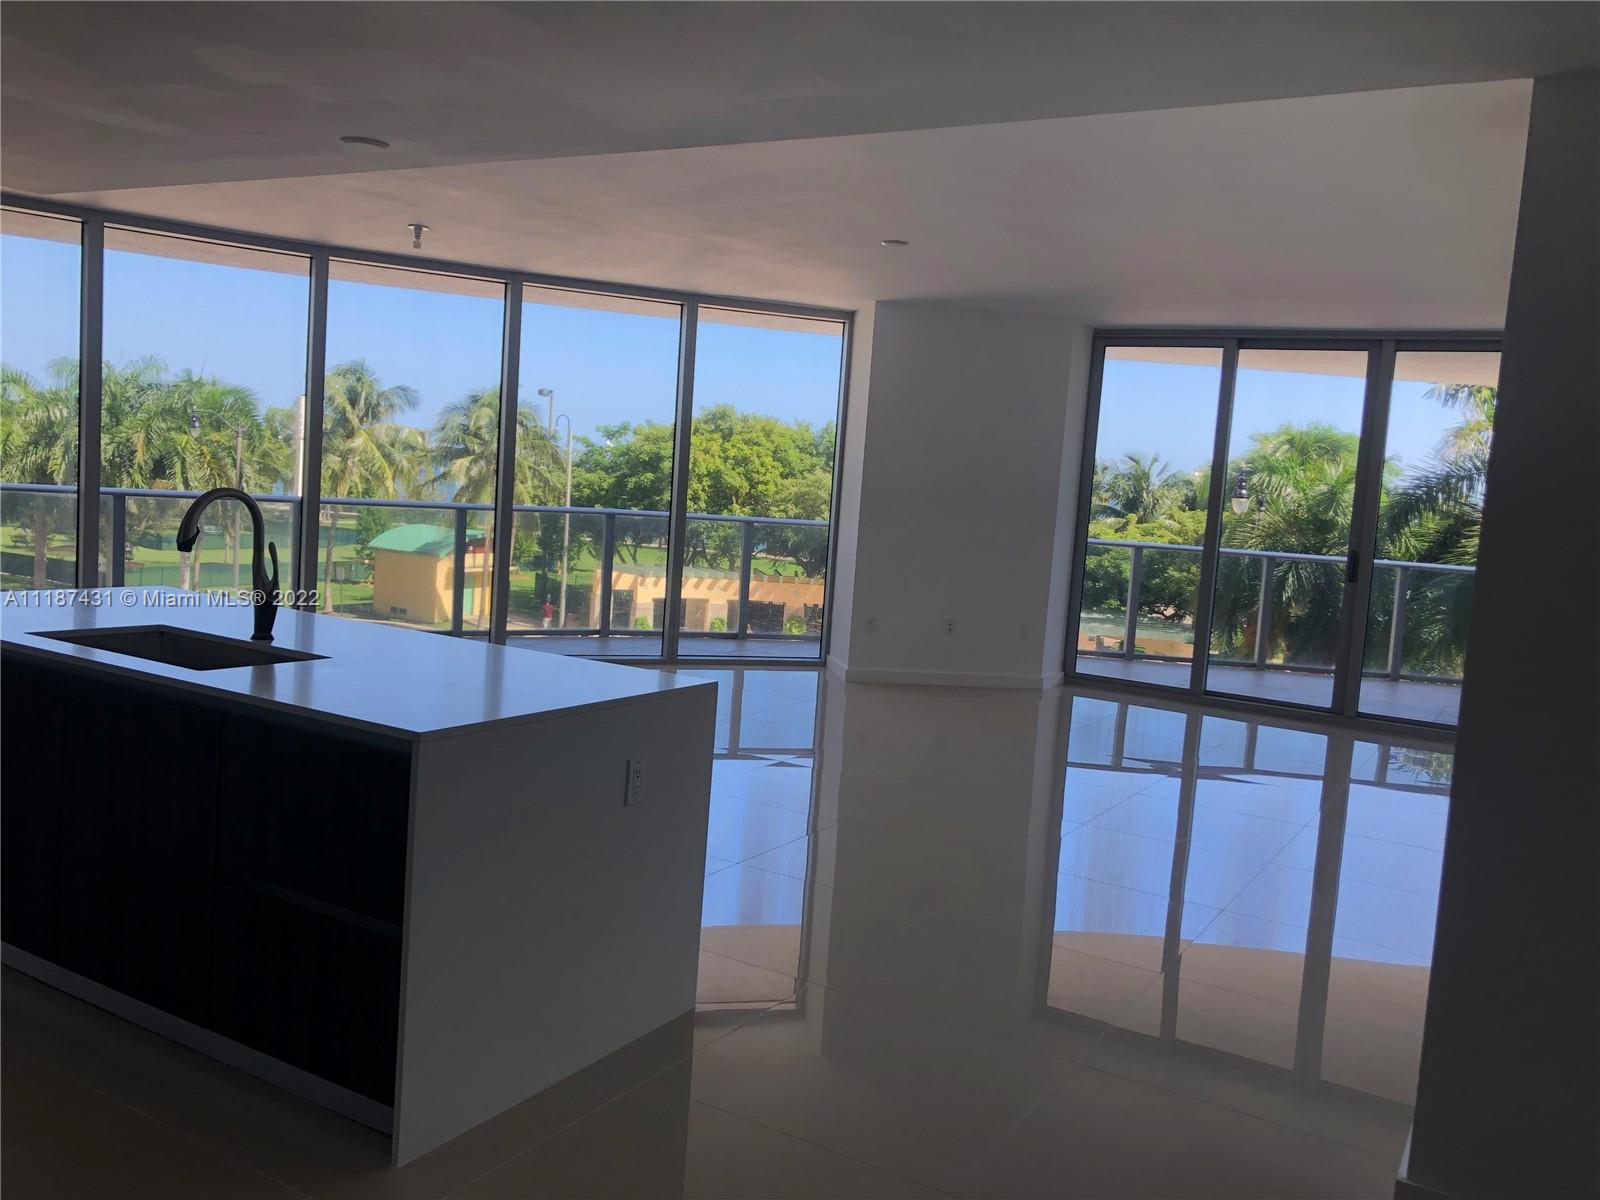 Brand new unit on the bay with expansive private terrace. Floor to ceiling glass windows on all with direct water and park views, situated on the last waterfront lot in the heart of the art and entertainment district in Edgewater, Miami's most talked about neighborhood. One assigned parking space.